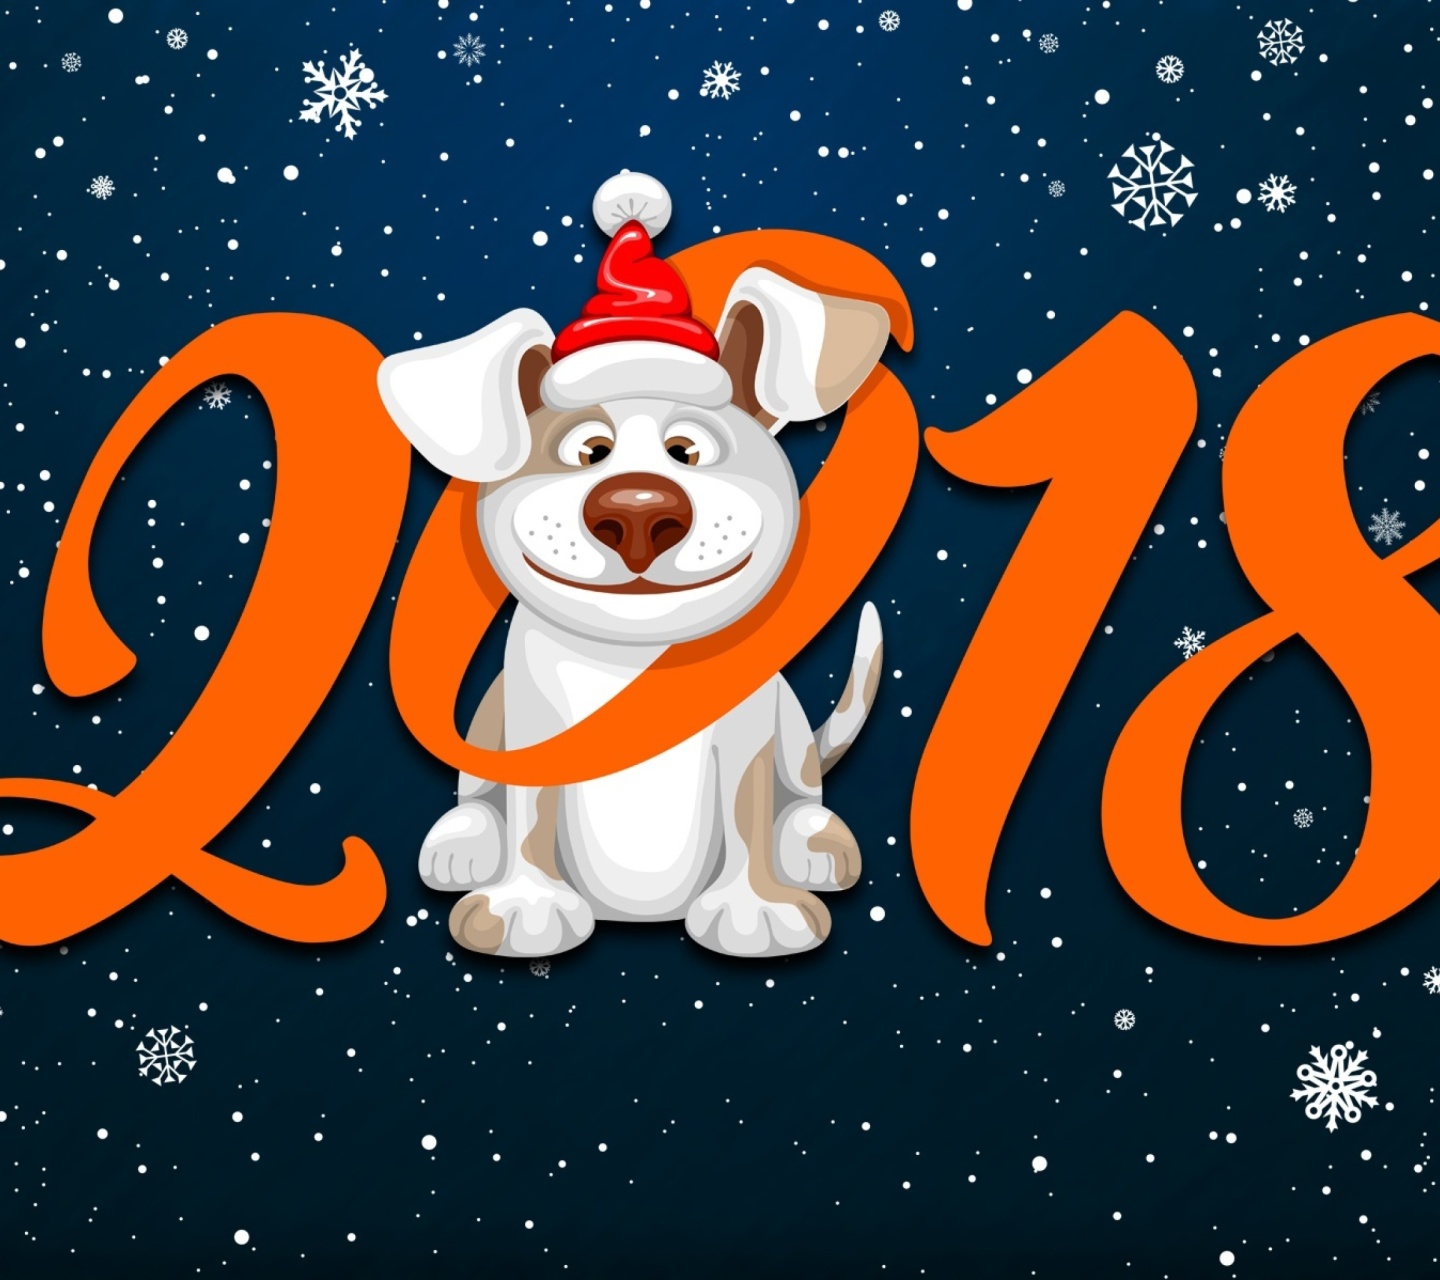 New Year Dog 2018 with Snow wallpaper 1440x1280